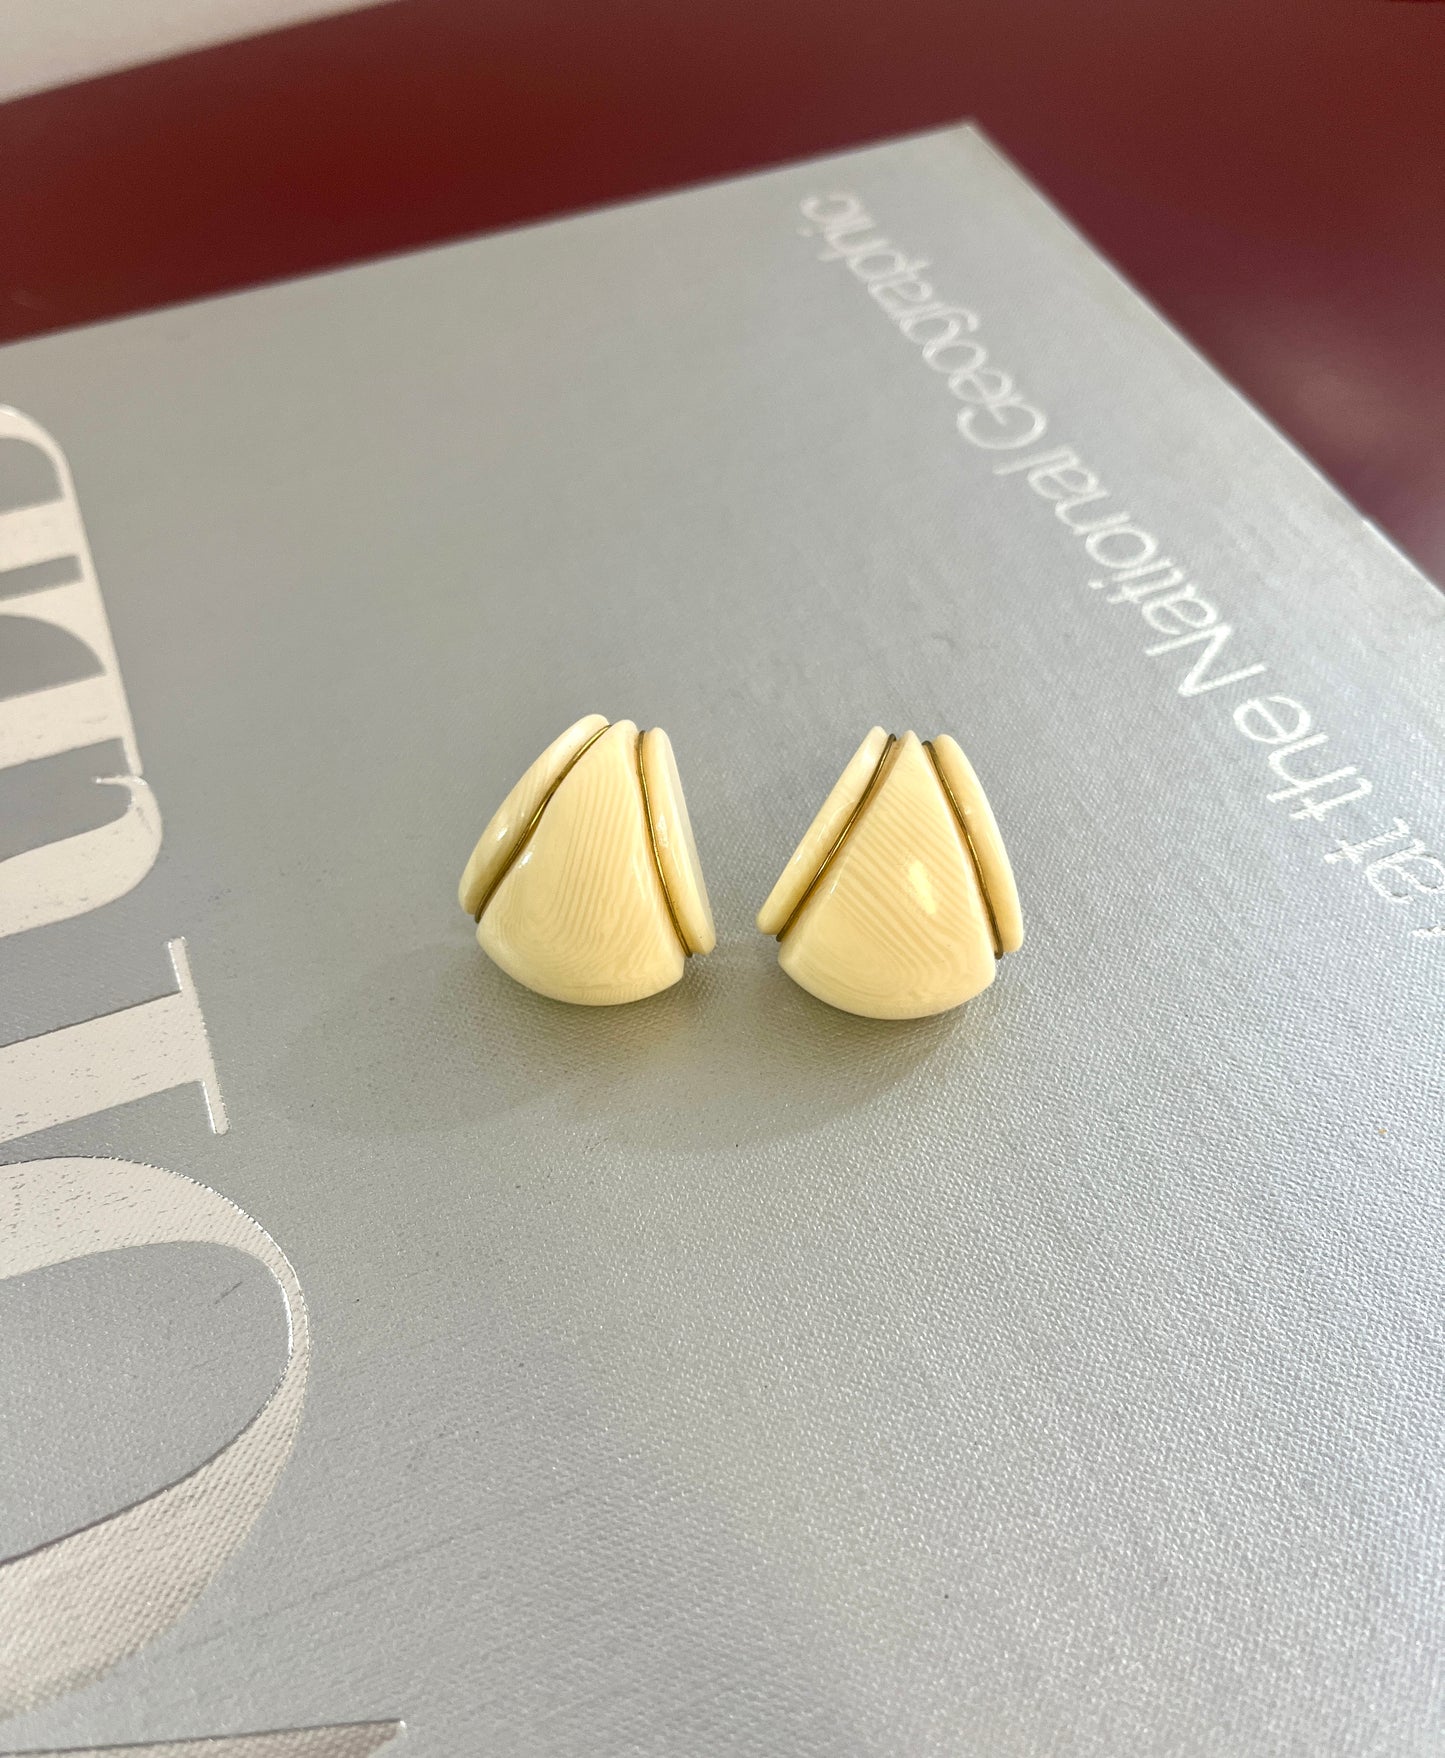 Vintage Richelieu Acrylic and Gold Studs